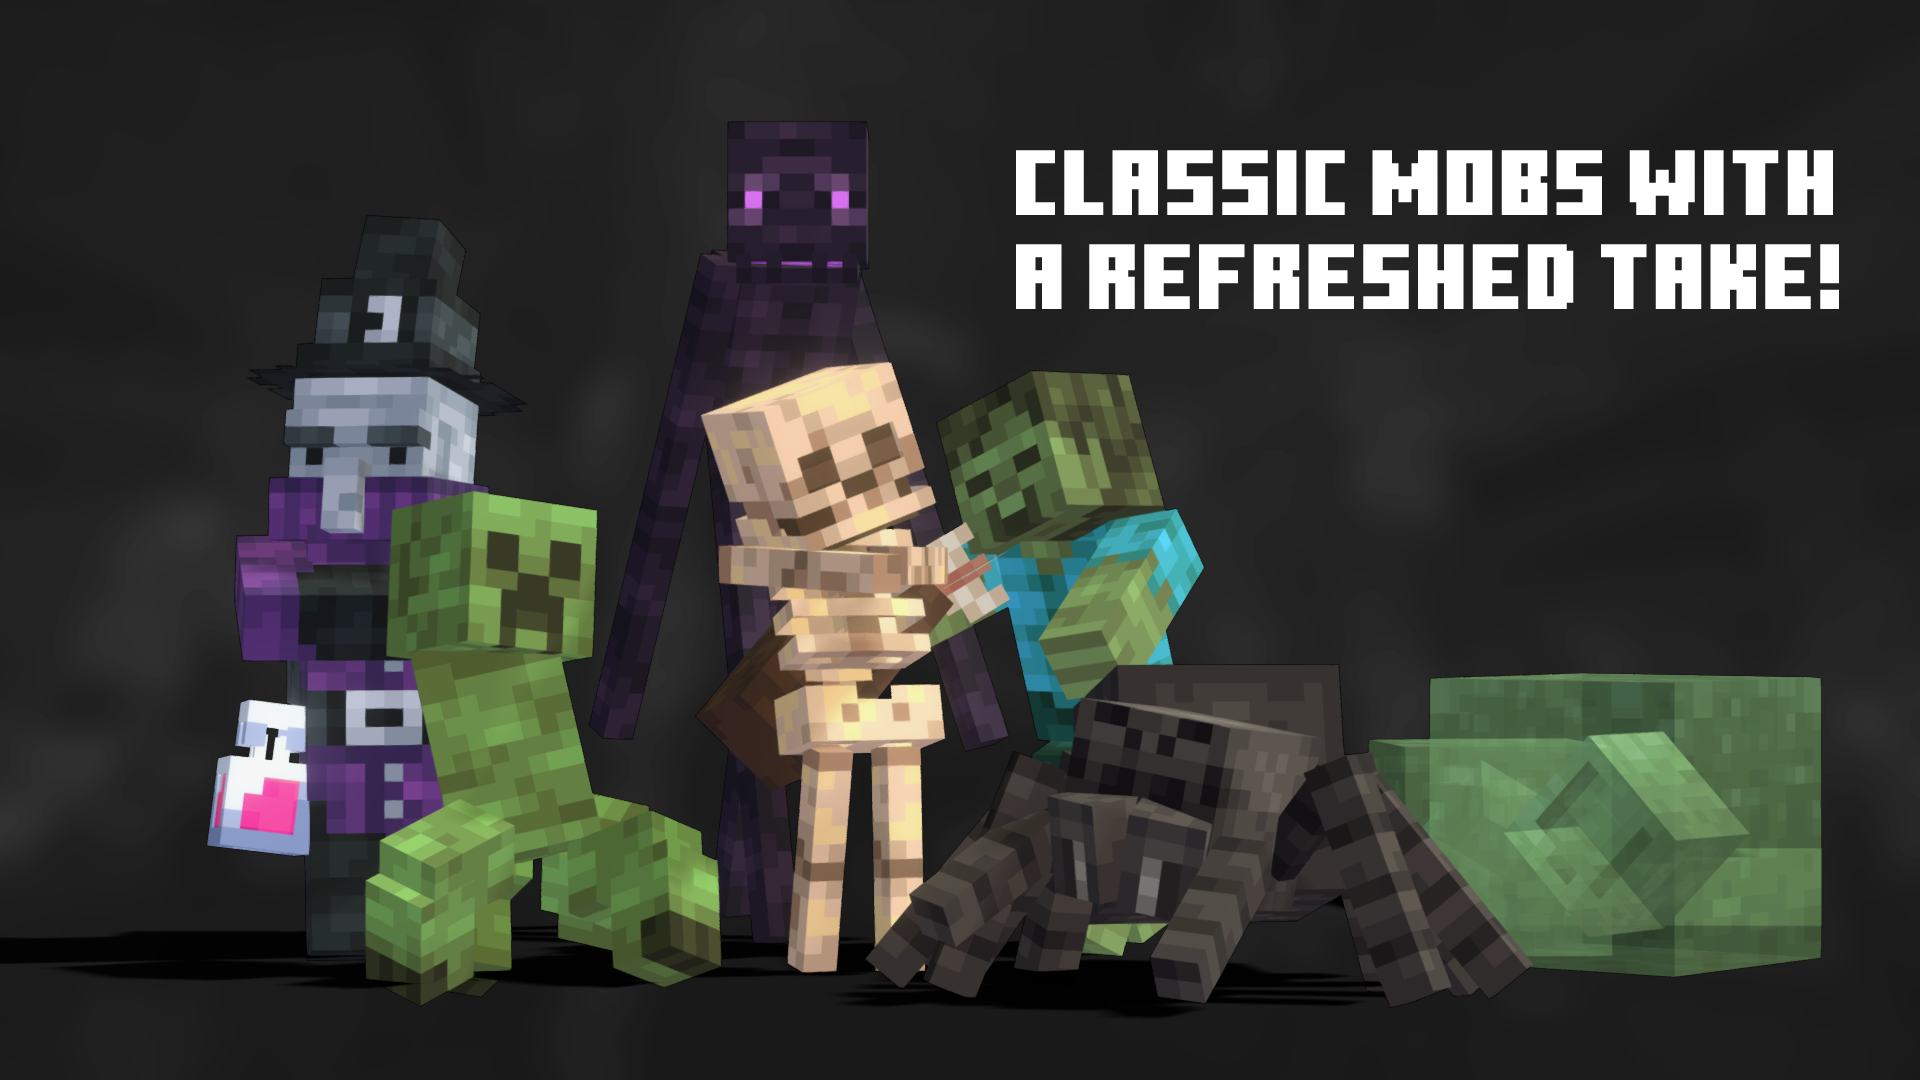 Classic Mobs with a Refreshed take!